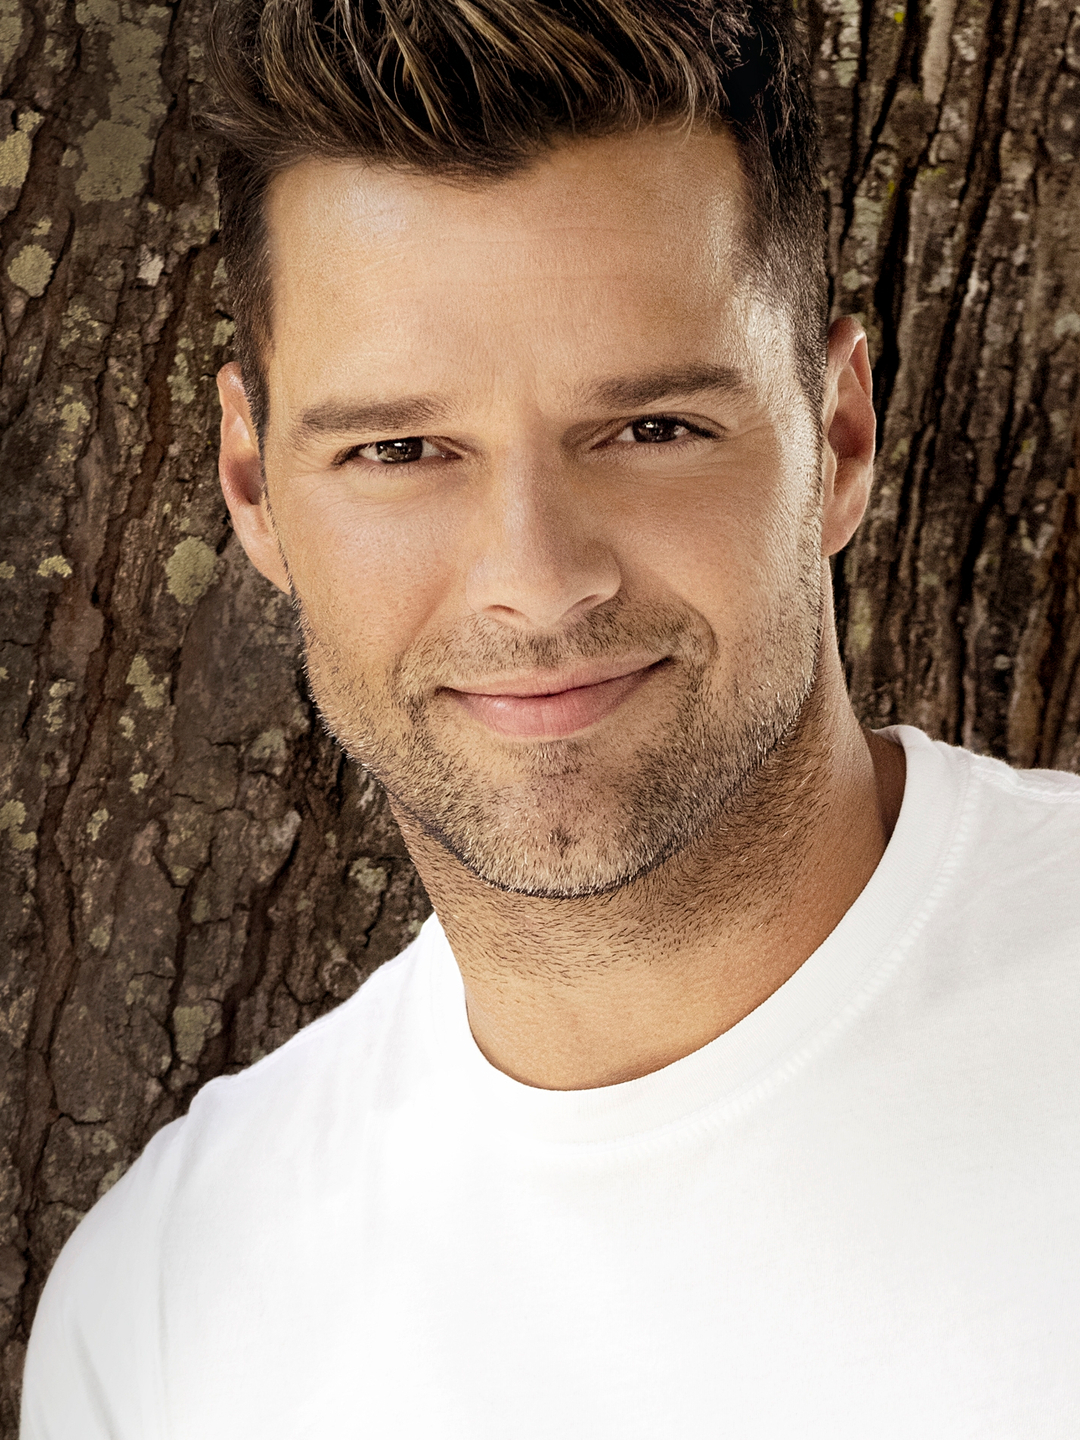 Ricky Martin how did he became famous